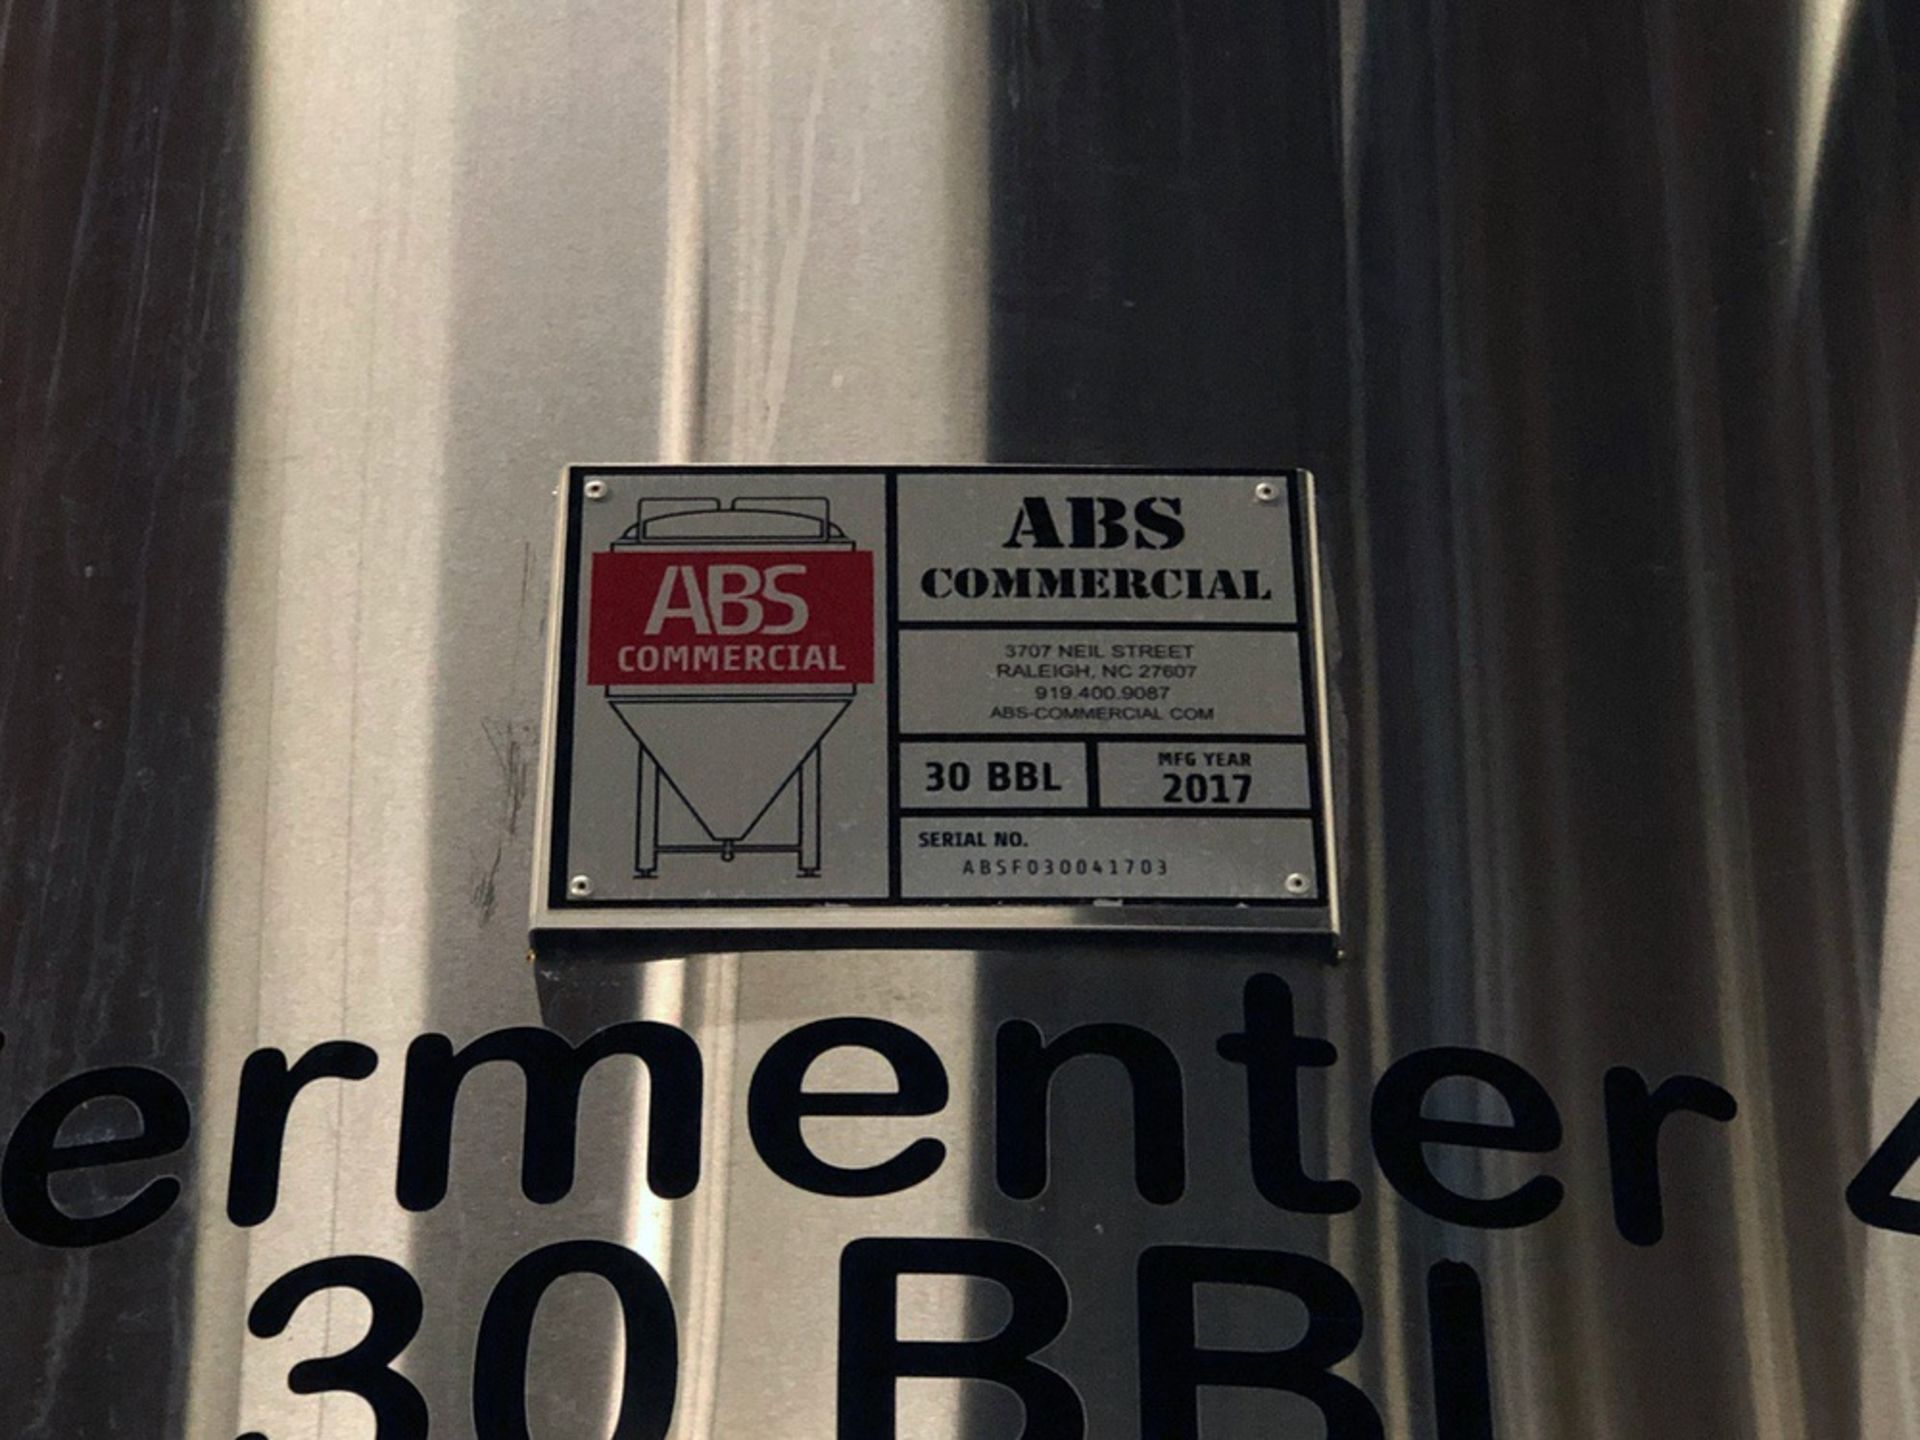 2017 ABS 30 BBL Fermenter, Glycol Jacketed, S/N: ABSF030041703, Appr - Subj to Bulk | Rig Fee: $950 - Image 4 of 6